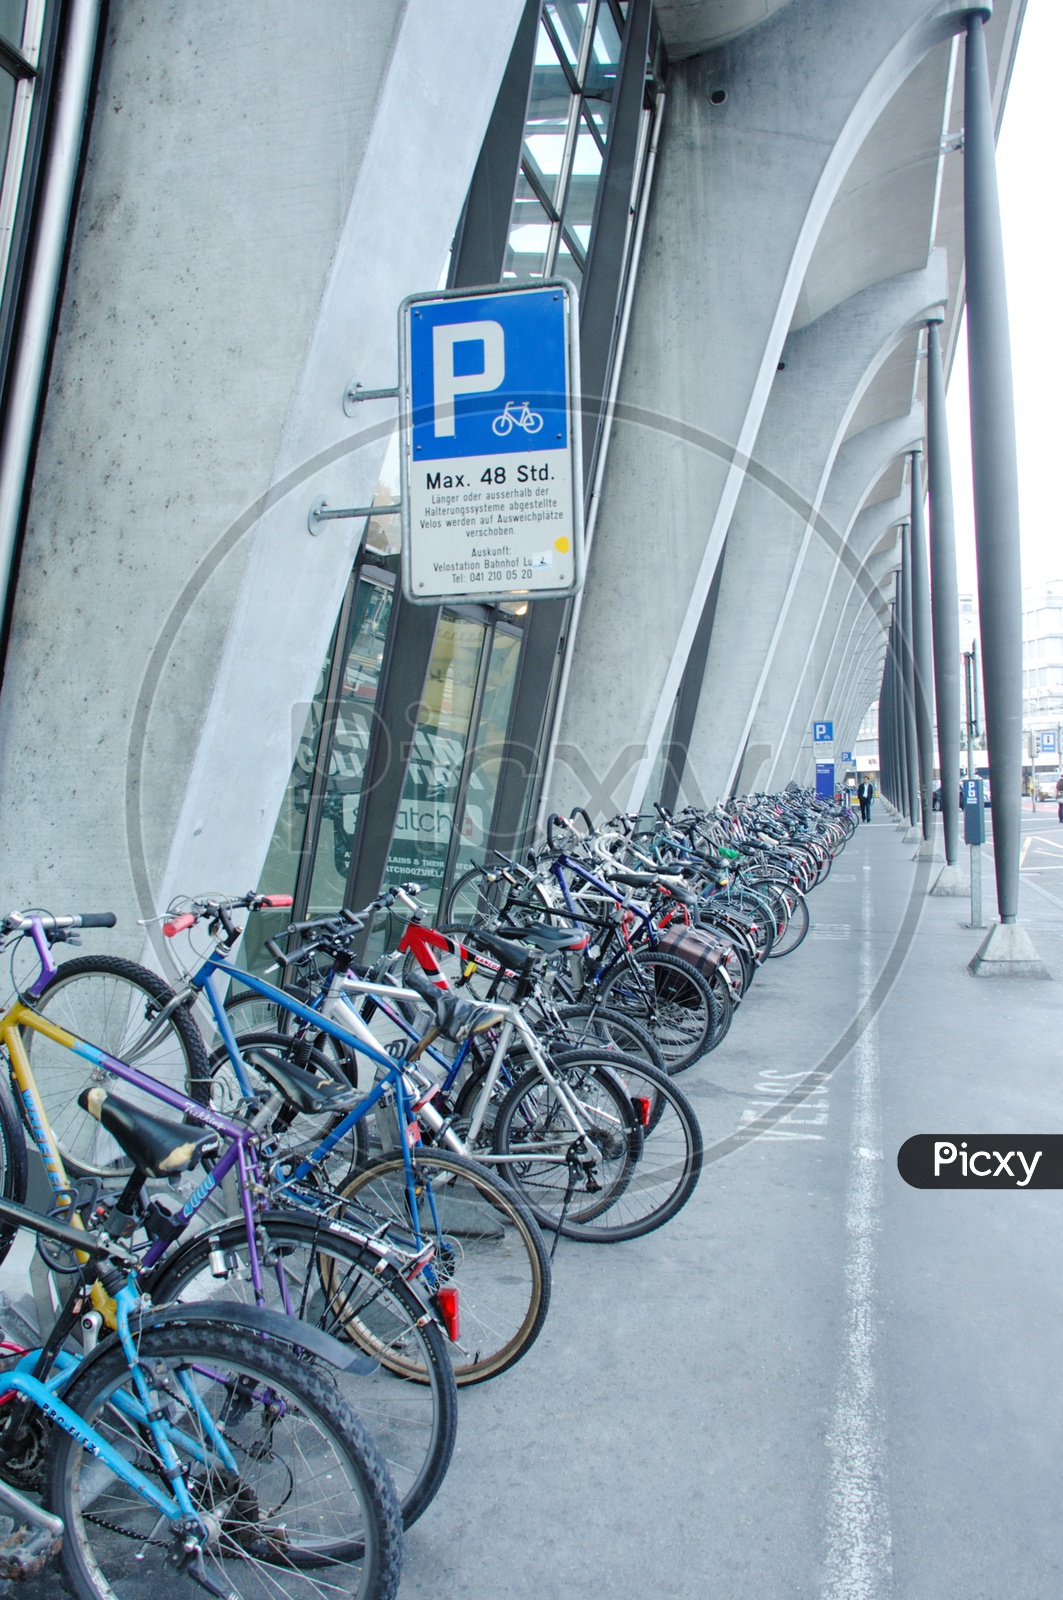 Bicycles Parked In a Parking Area